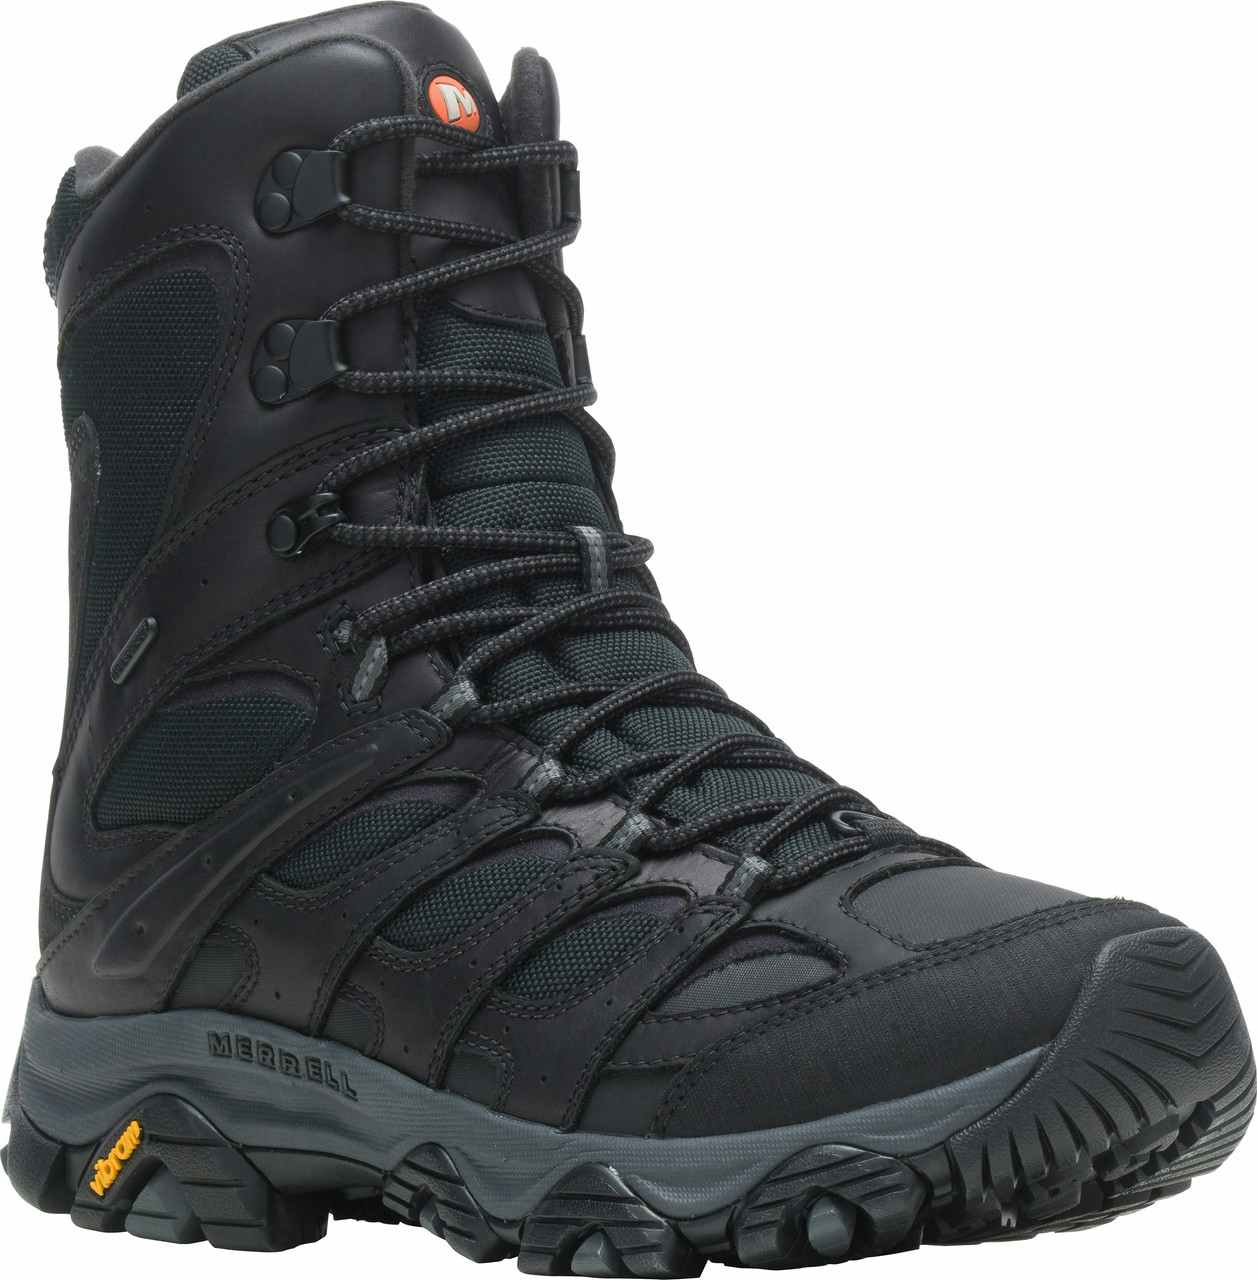 Moab 3 Thermo Xtreme Waterproof Boots Black